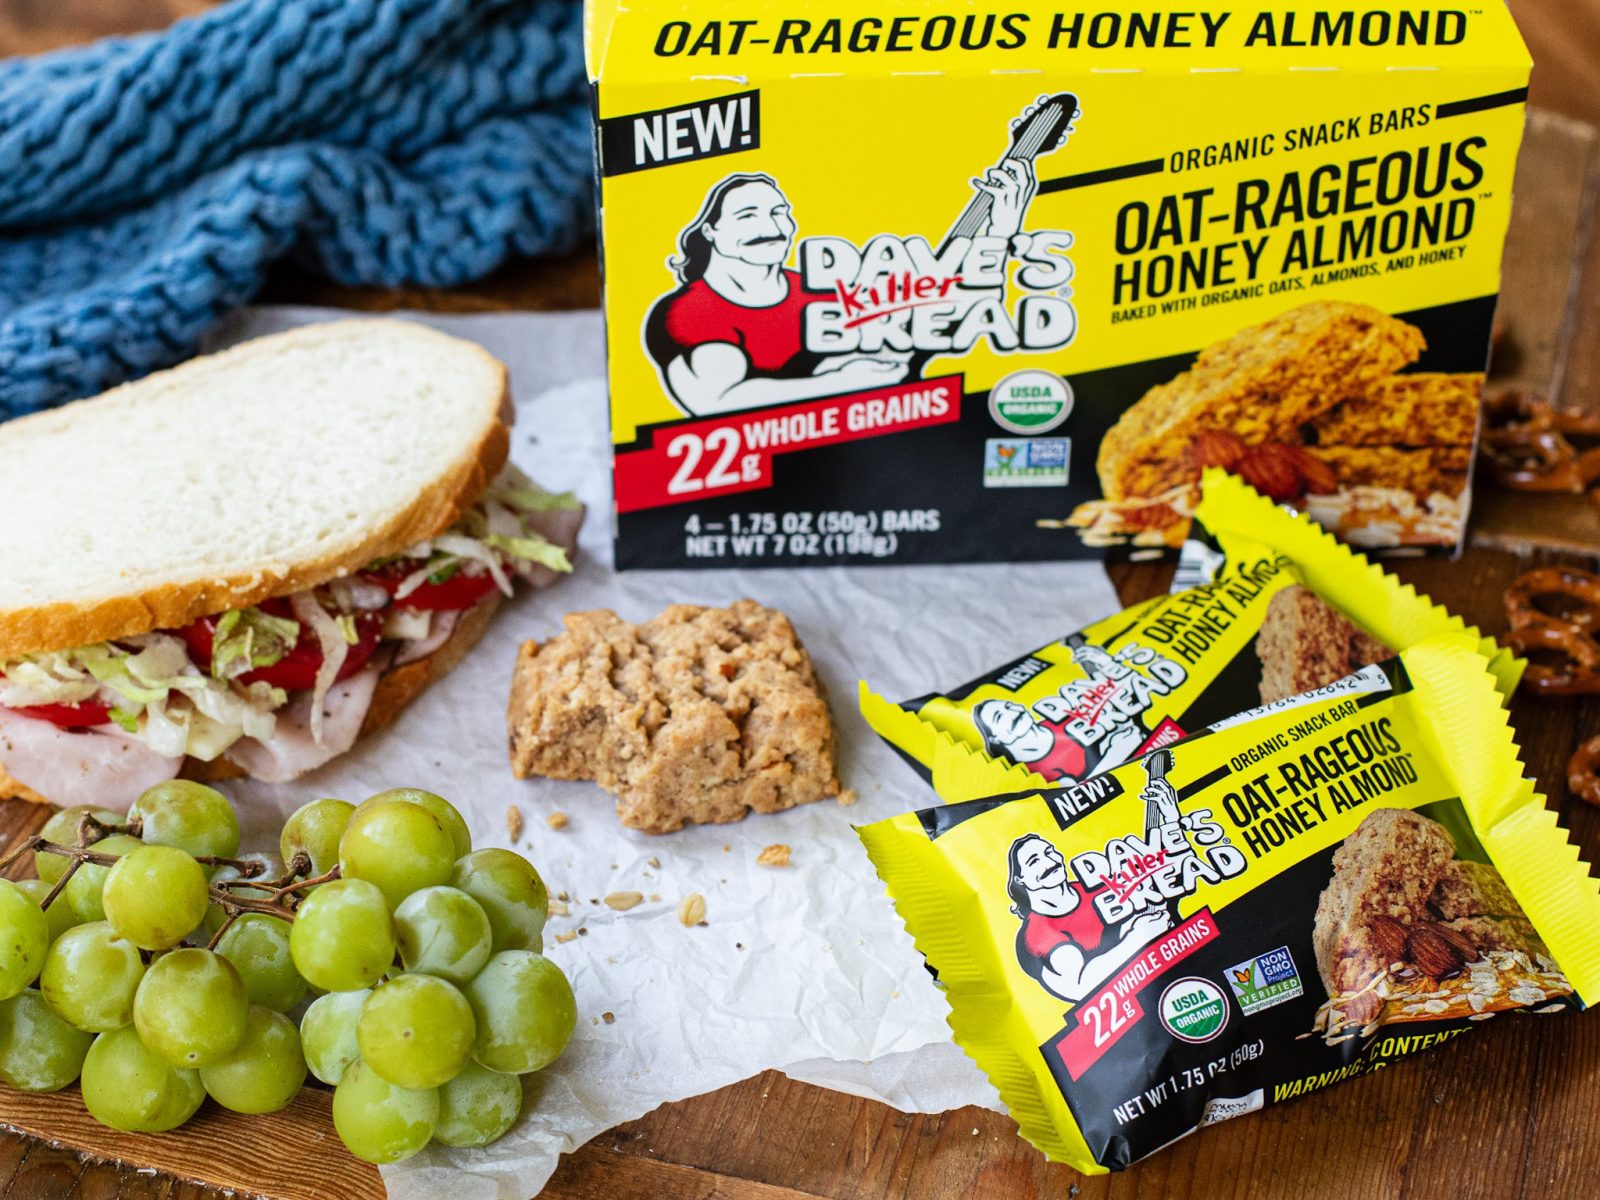 Get A Box Of Dave’s Killer Bread Snack Bars For Just $1.49 At Kroger